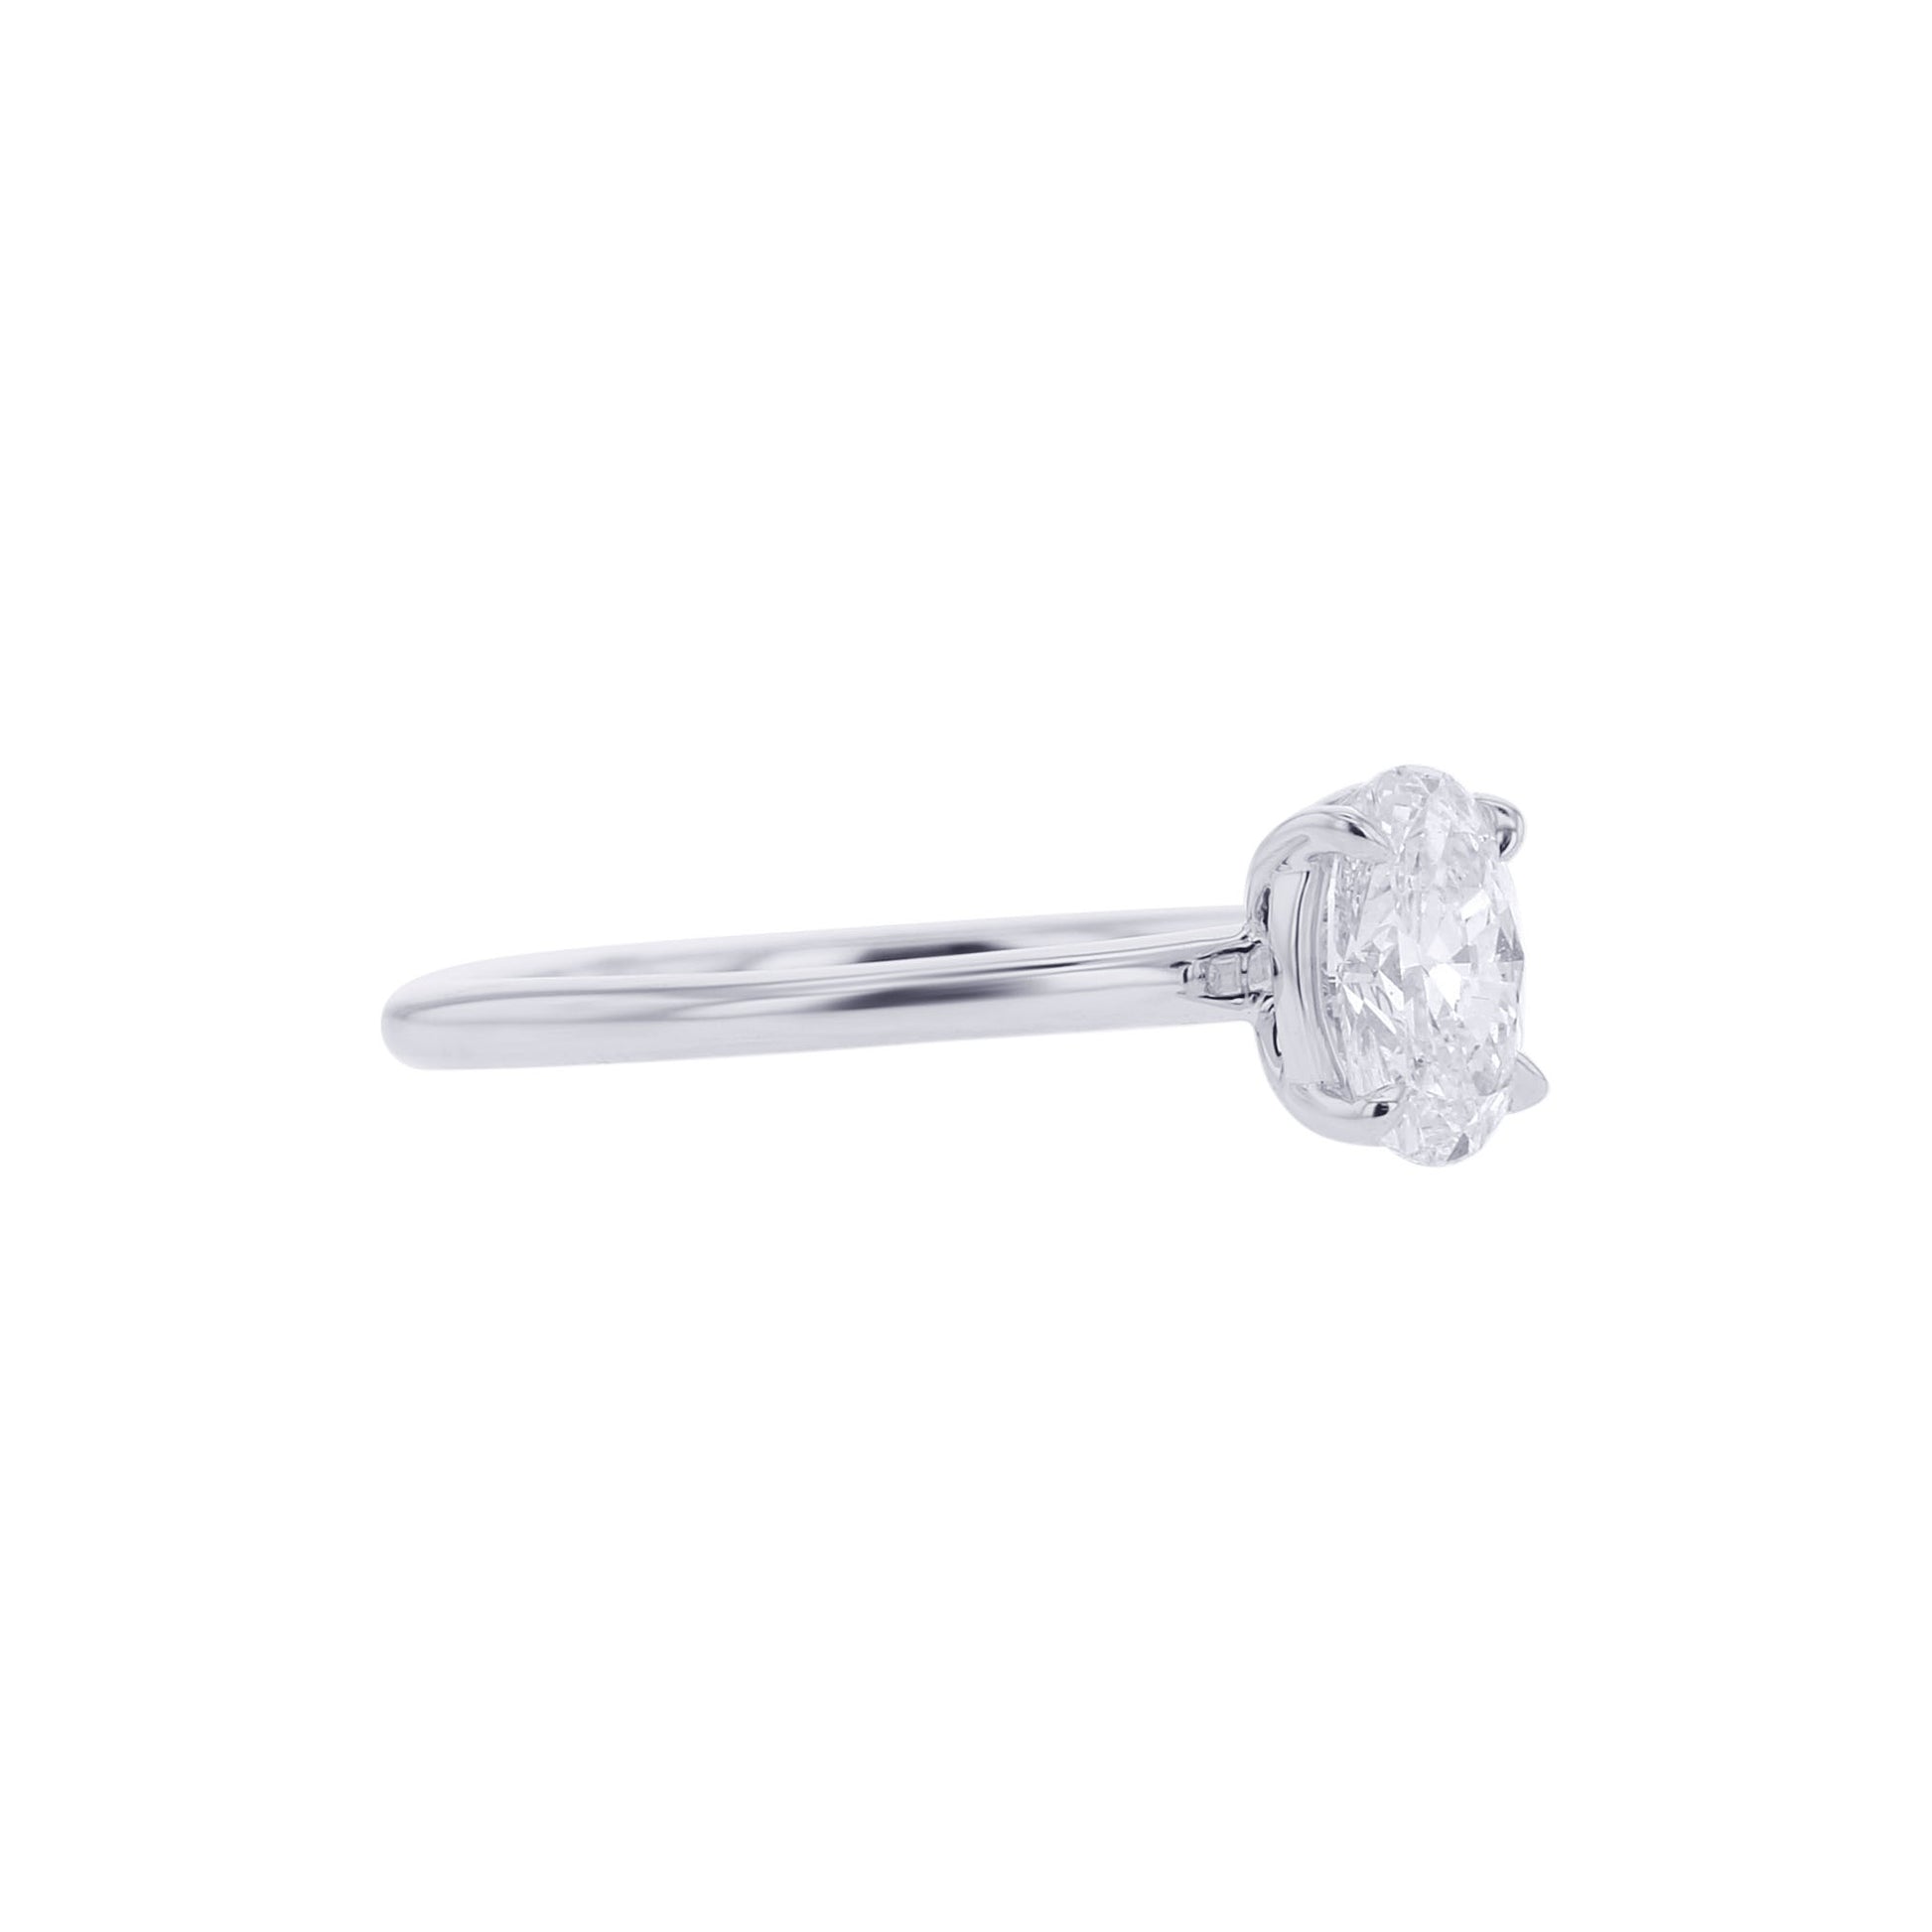 Ember Oval Ready for Love Diamond Engagement Ring 3/4ct